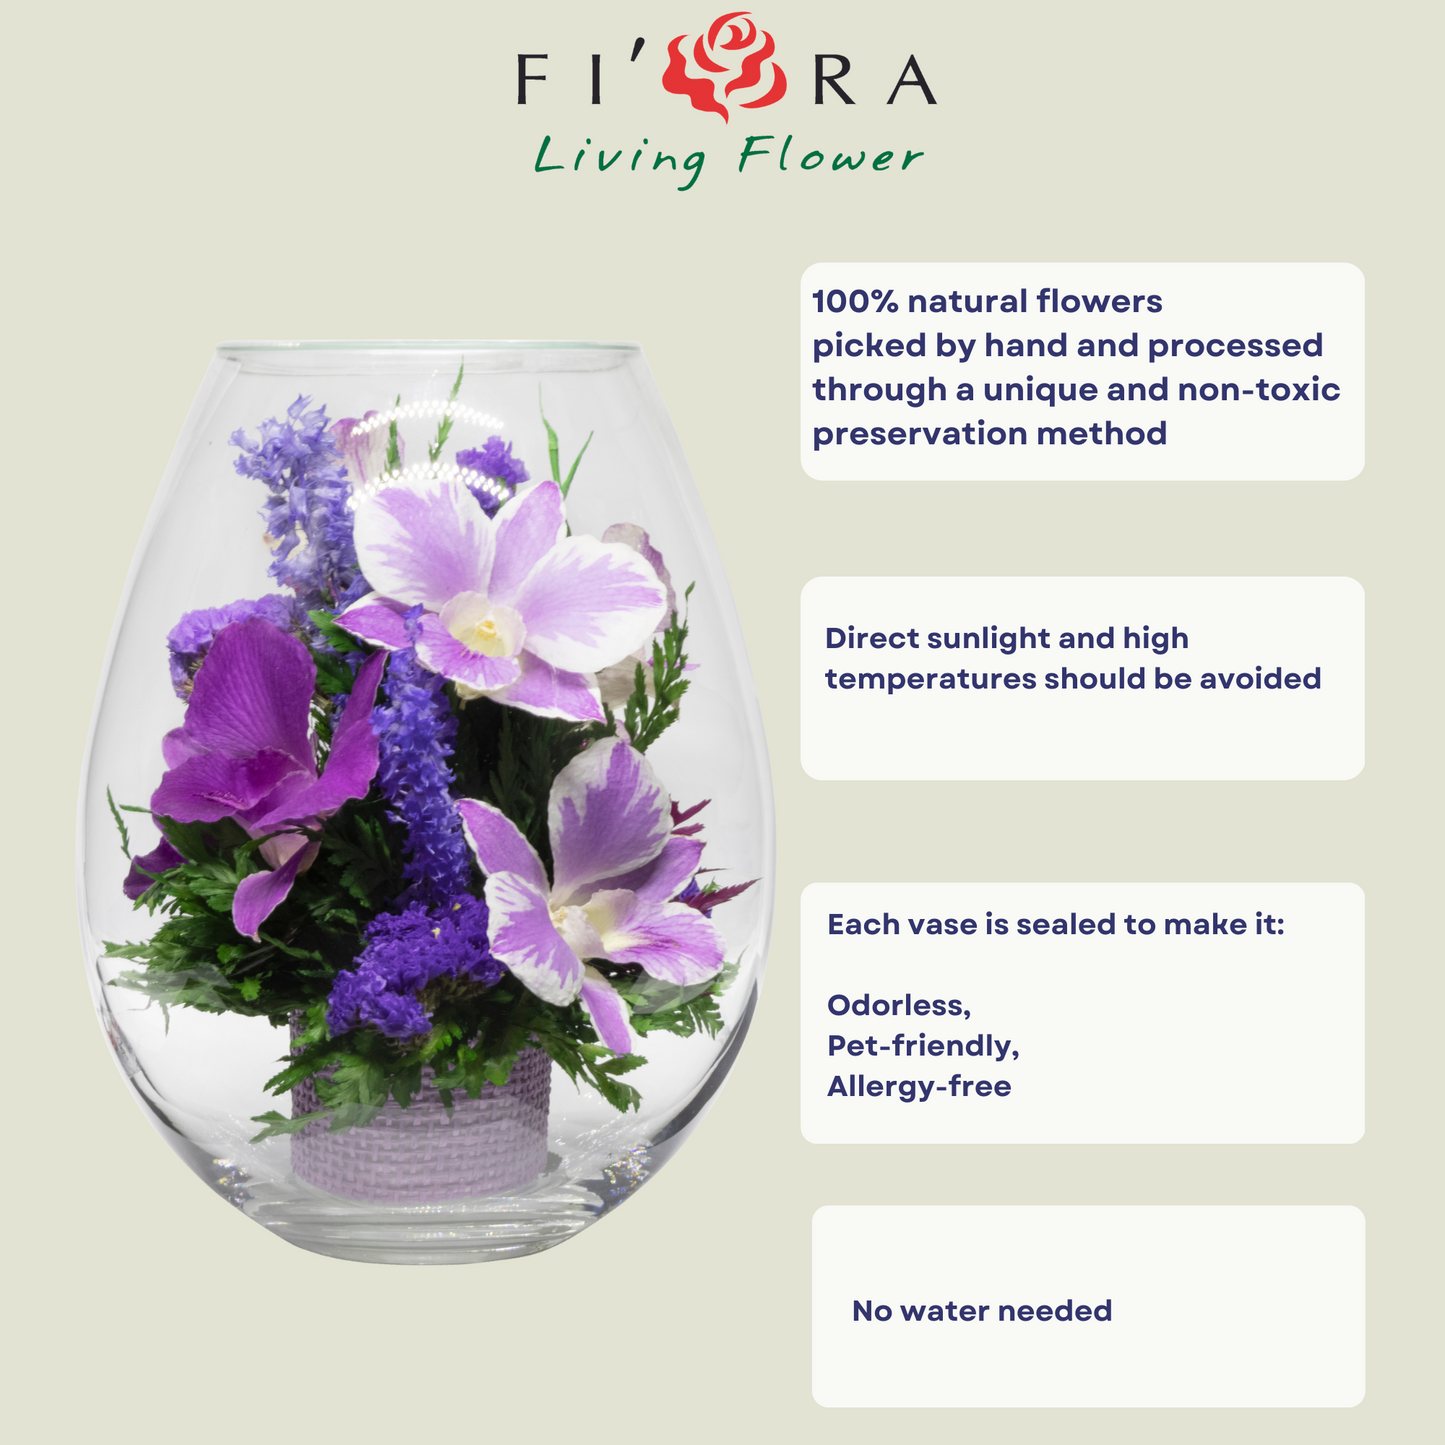 71850 Long-Lasting Purple Orchids in a Droplet Glass Vase